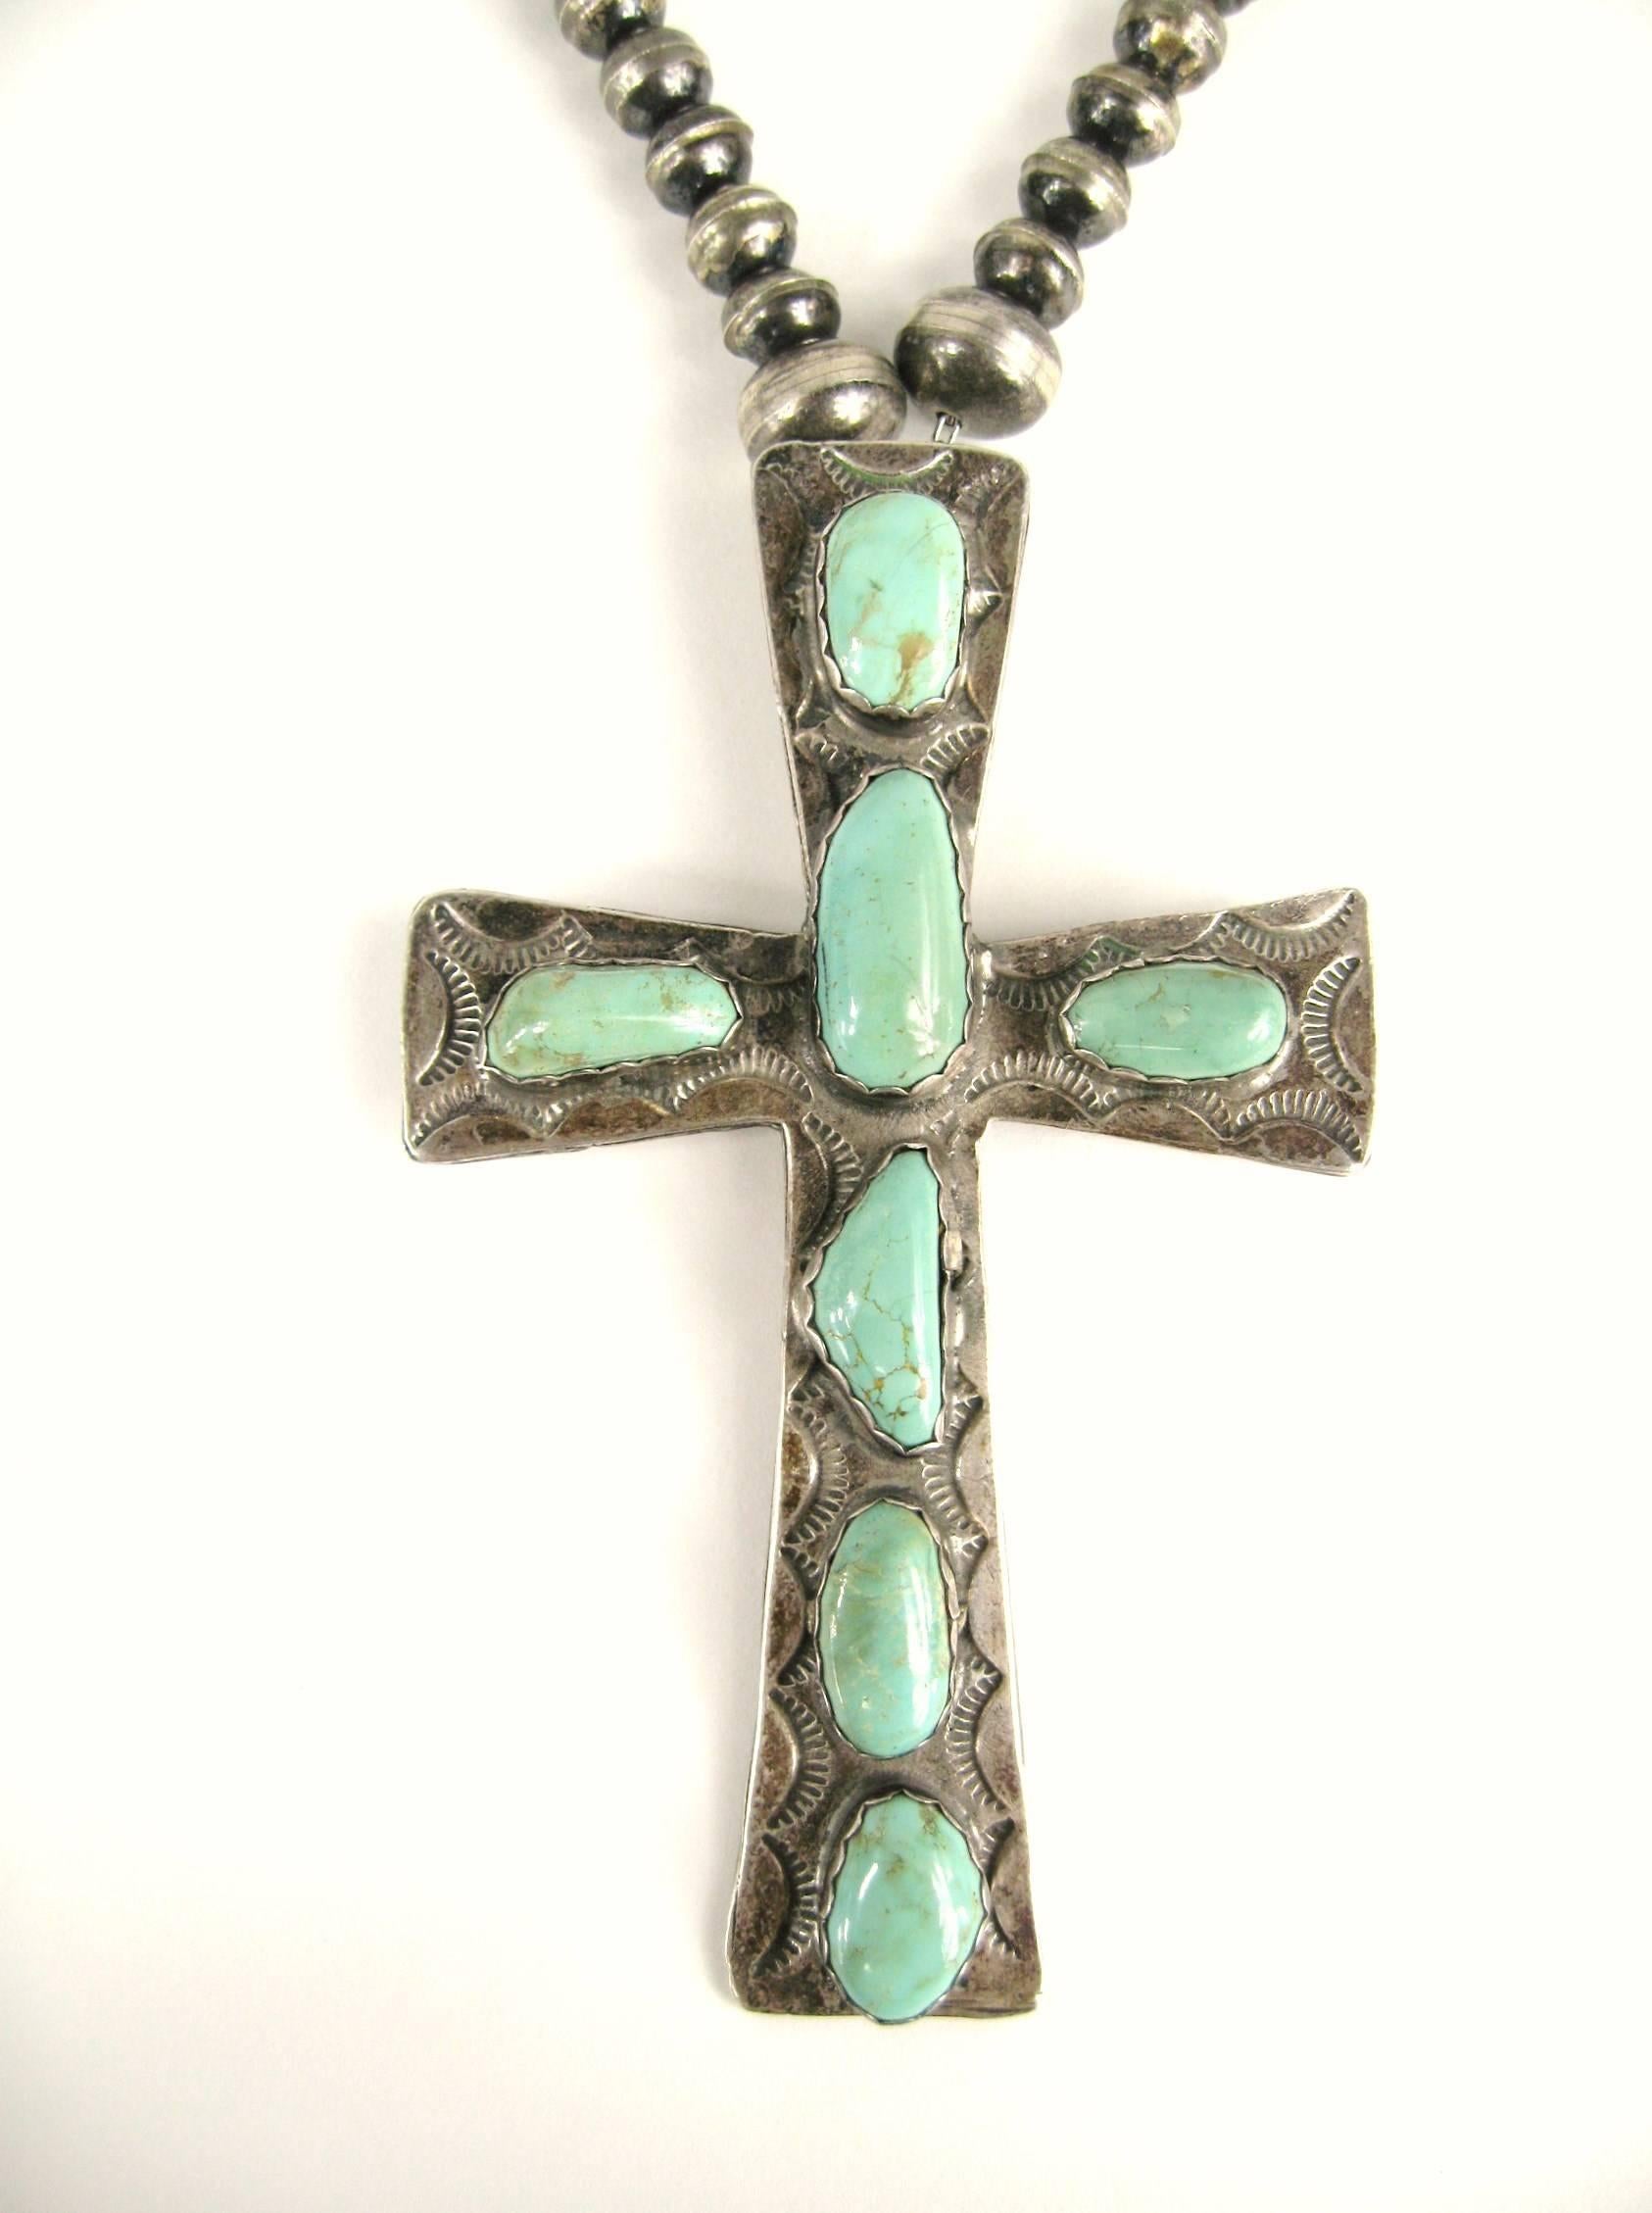 This is a massive hand crafted early Native American Navajo Cross. 7 large Turquoise stones set in this highly decorated cross. 
The cross measures 
4